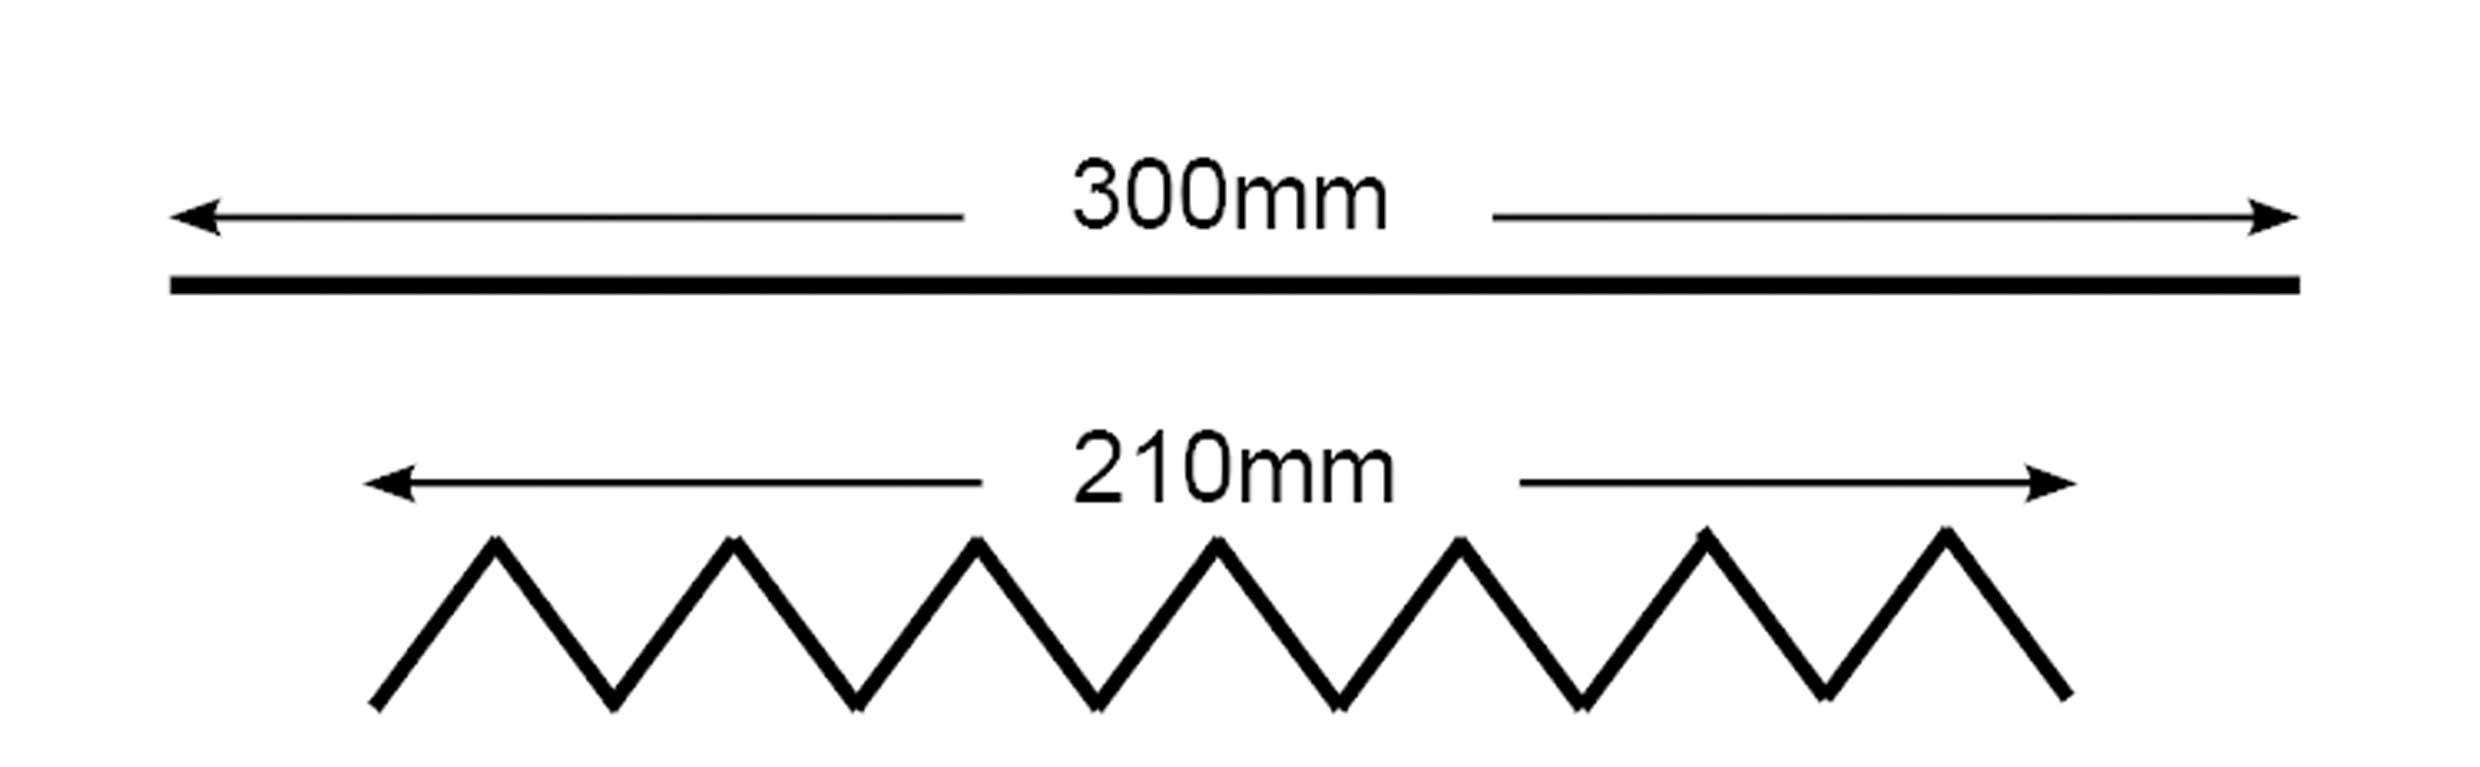 A black and white illustration of a flat, horizontal line with the measurement 